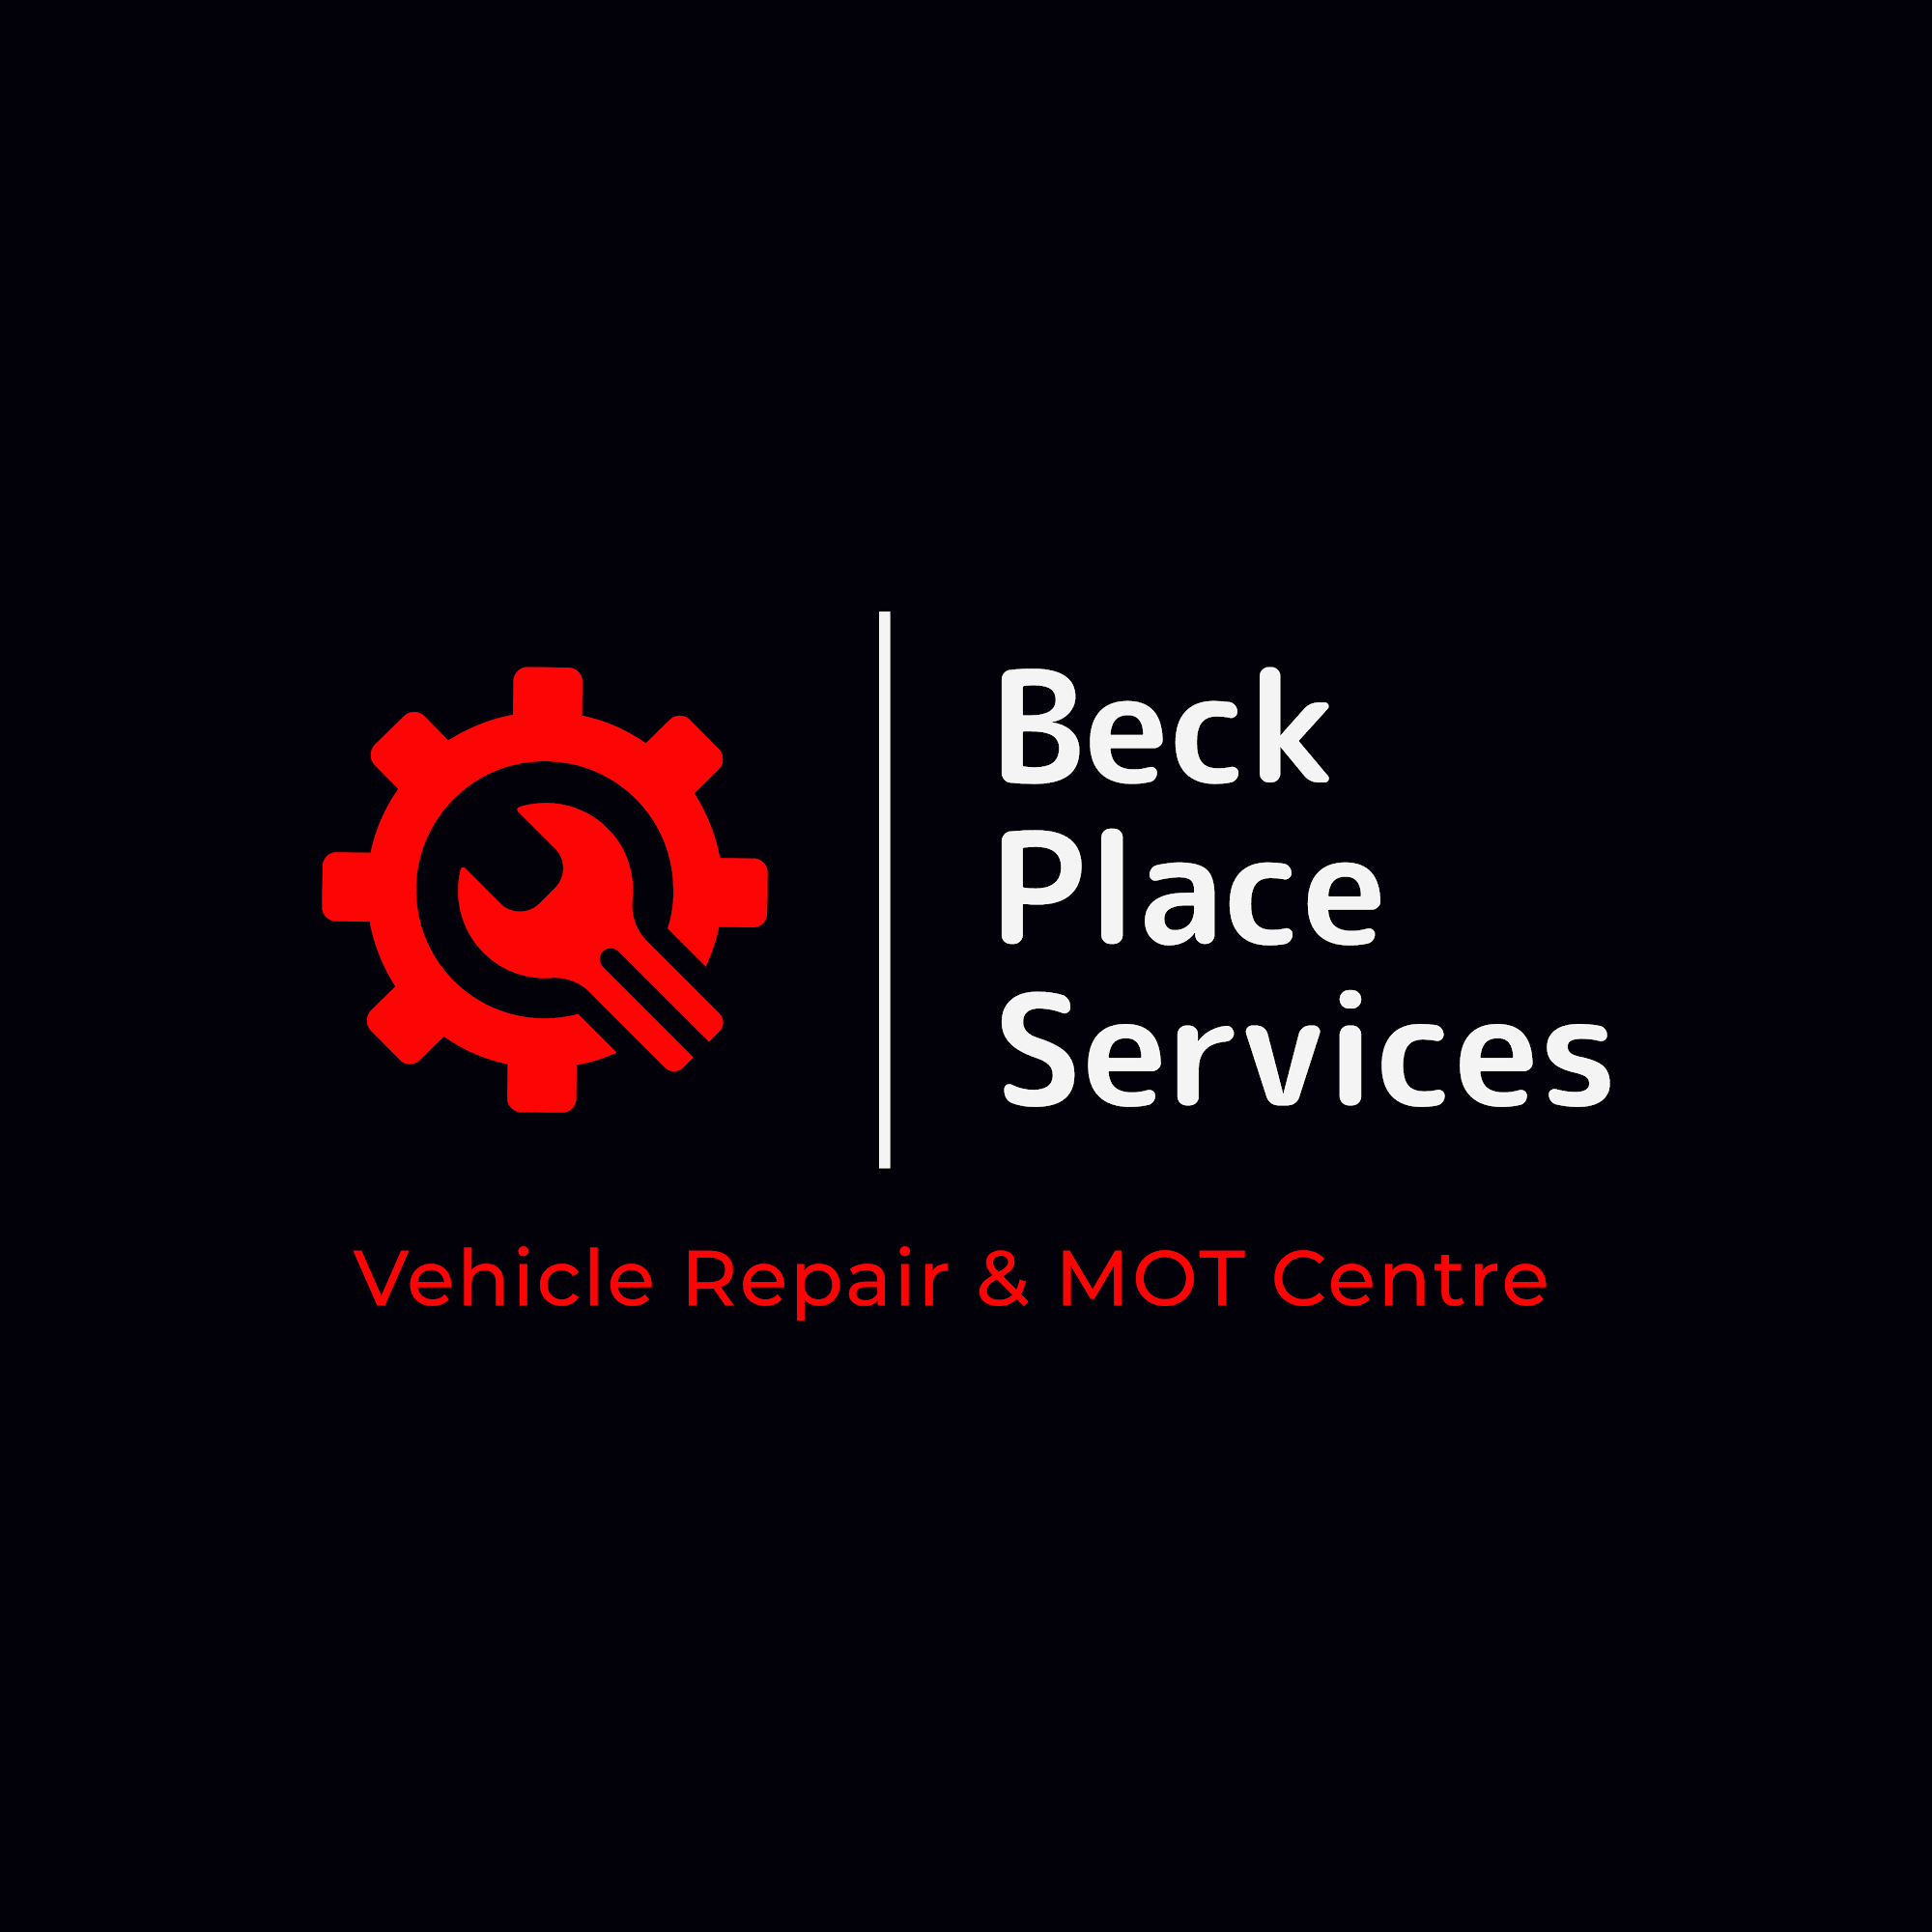 Beck Place Services